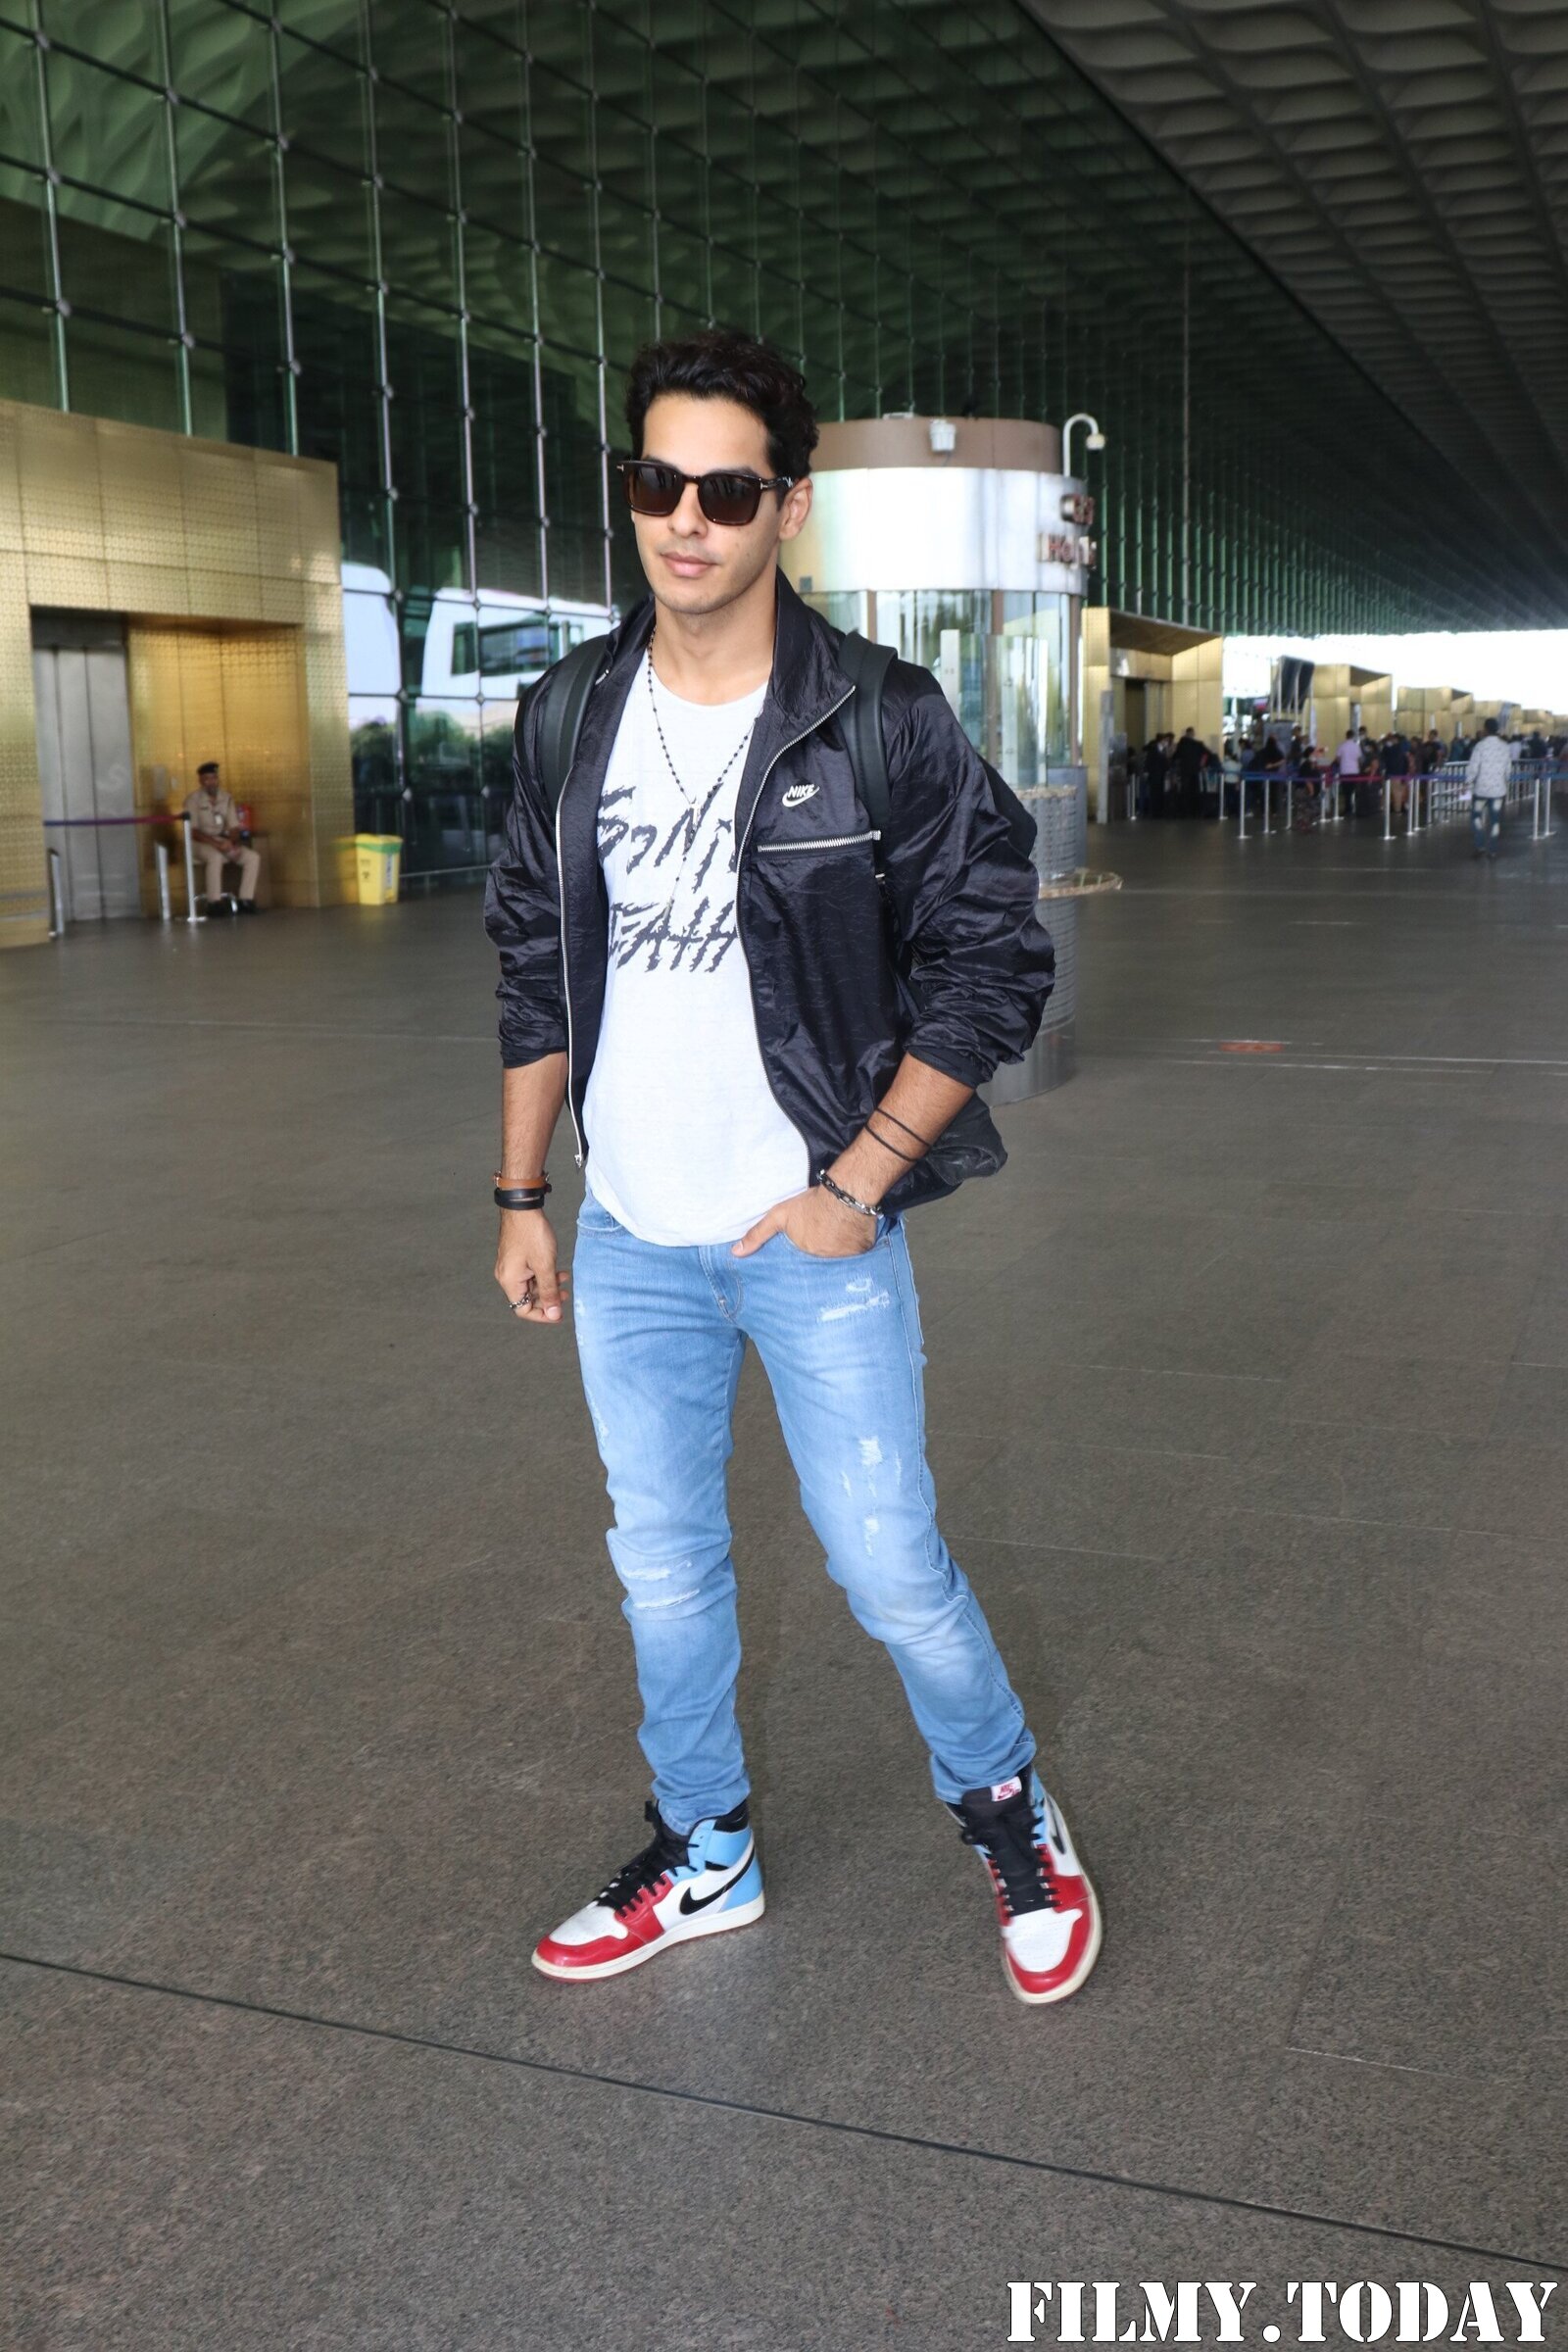 Ishaan Khattar - Photos: Celebs Spotted At Airport | Picture 1888502